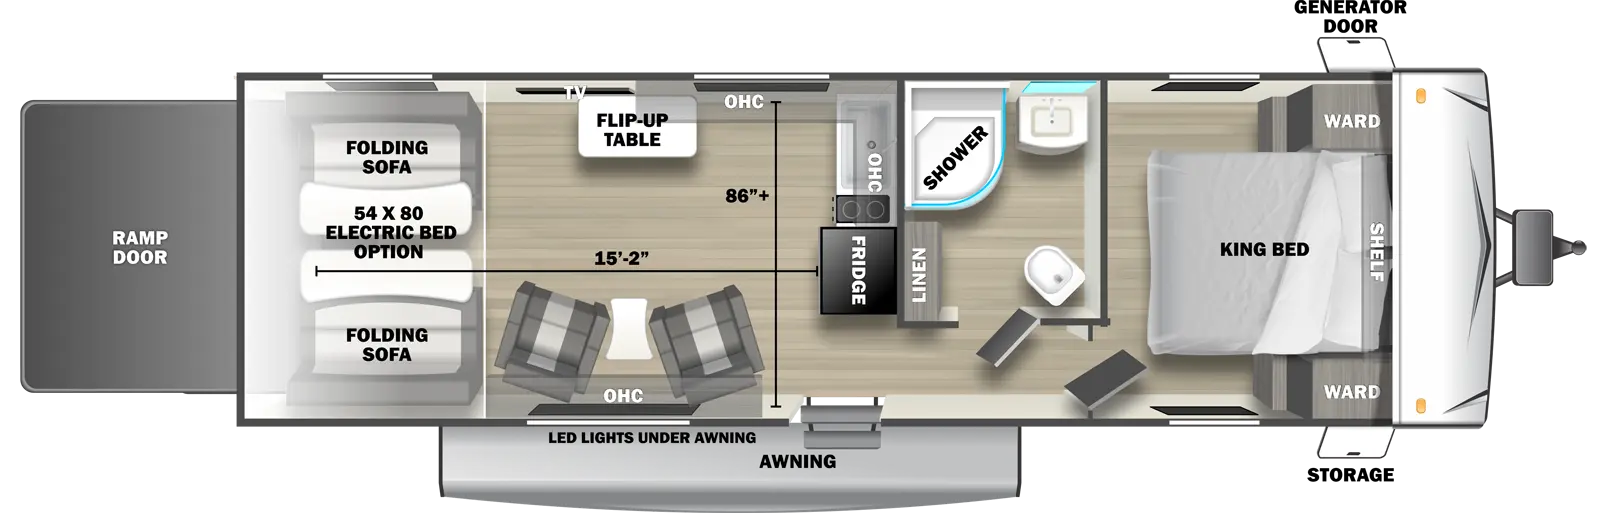 The 2750SLX travel trailer has no slide outs, 1 entry door and 1 rear ramp door. Exterior features include an awning with LED lights, front door side storage and front off-door side generator door. Interior layout from front to back includes: front bedroom with foot-facing King bed, shelf over the bed, and front corner wardrobes; off-door side bathroom with shower, linen storage, toilet and single sink vanity; rear facing kitchen countertop with sink, overhead cabinet, stove top and rear facing refrigerator; overhead cabinet continues to off-door side; off-door side TV with flip-up table; 2 door side recliners with end table; and rear 54 x 80 electric bed option over electric pass-through dinette. Cargo length from rear of unit to refrigerator is 15 ft. 2 in. Cargo width from wall to wall is is 86 inches.